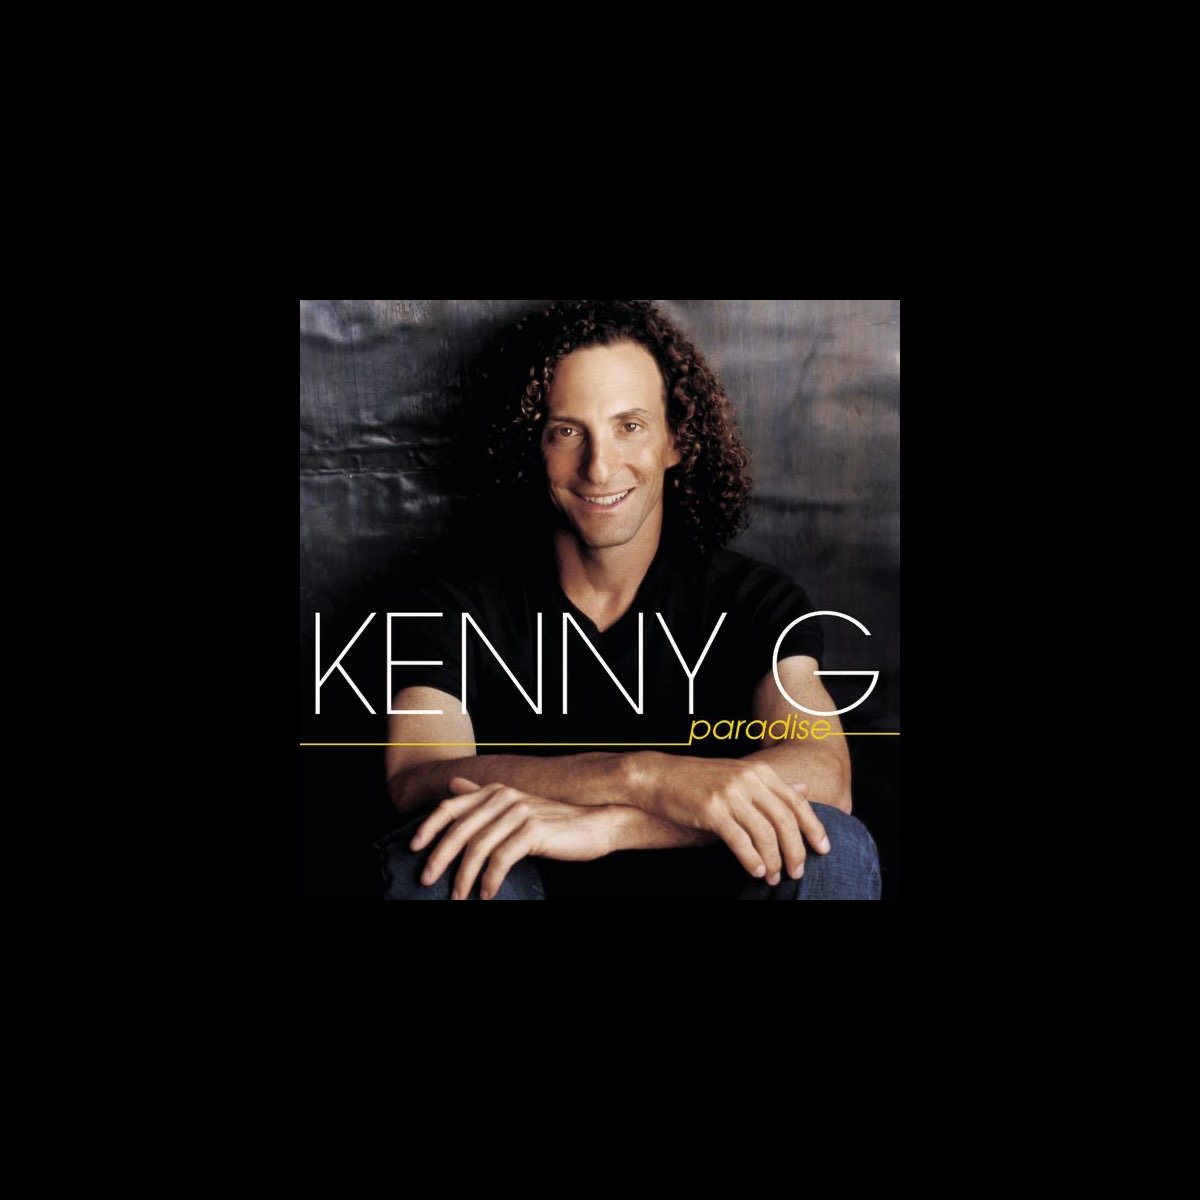 Paradise By Kenny G On Apple Music